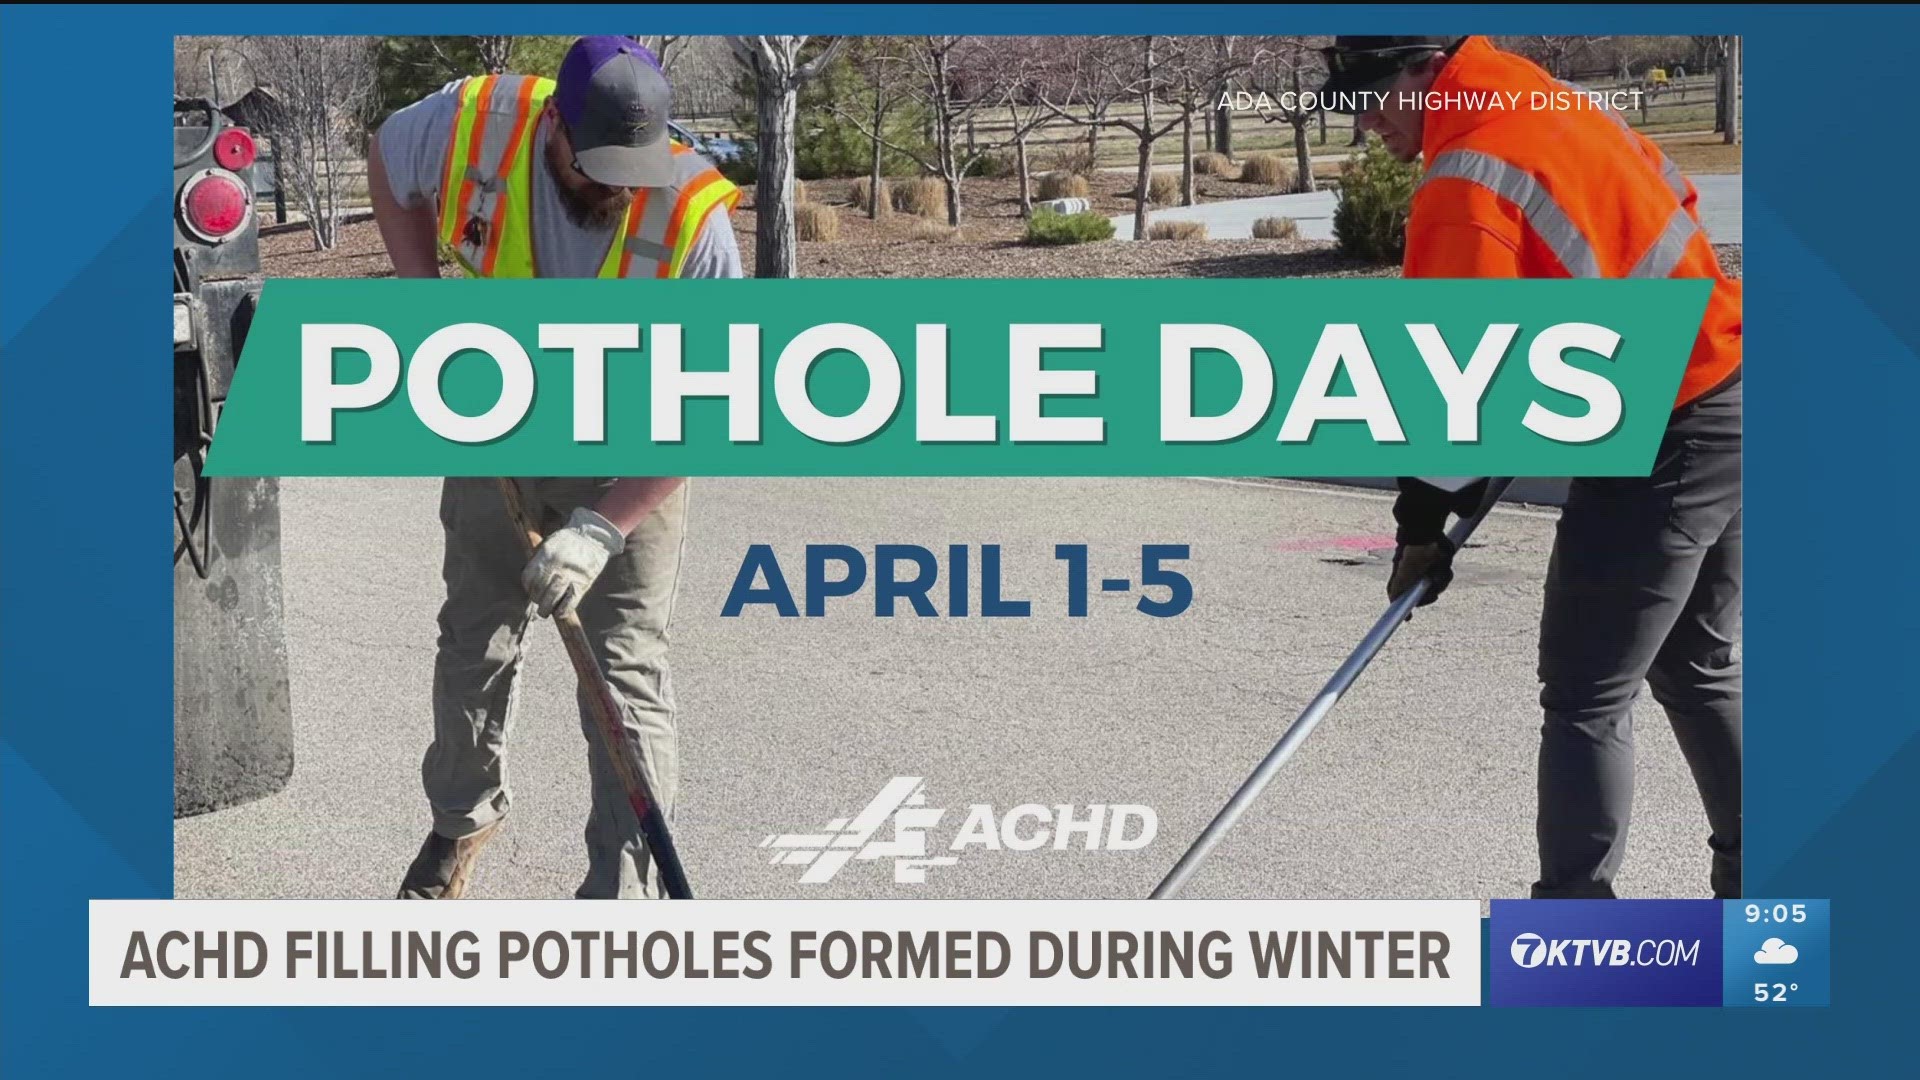 The district starts "Pothole Days" next week, coming to get down and keep your car from jumping around.